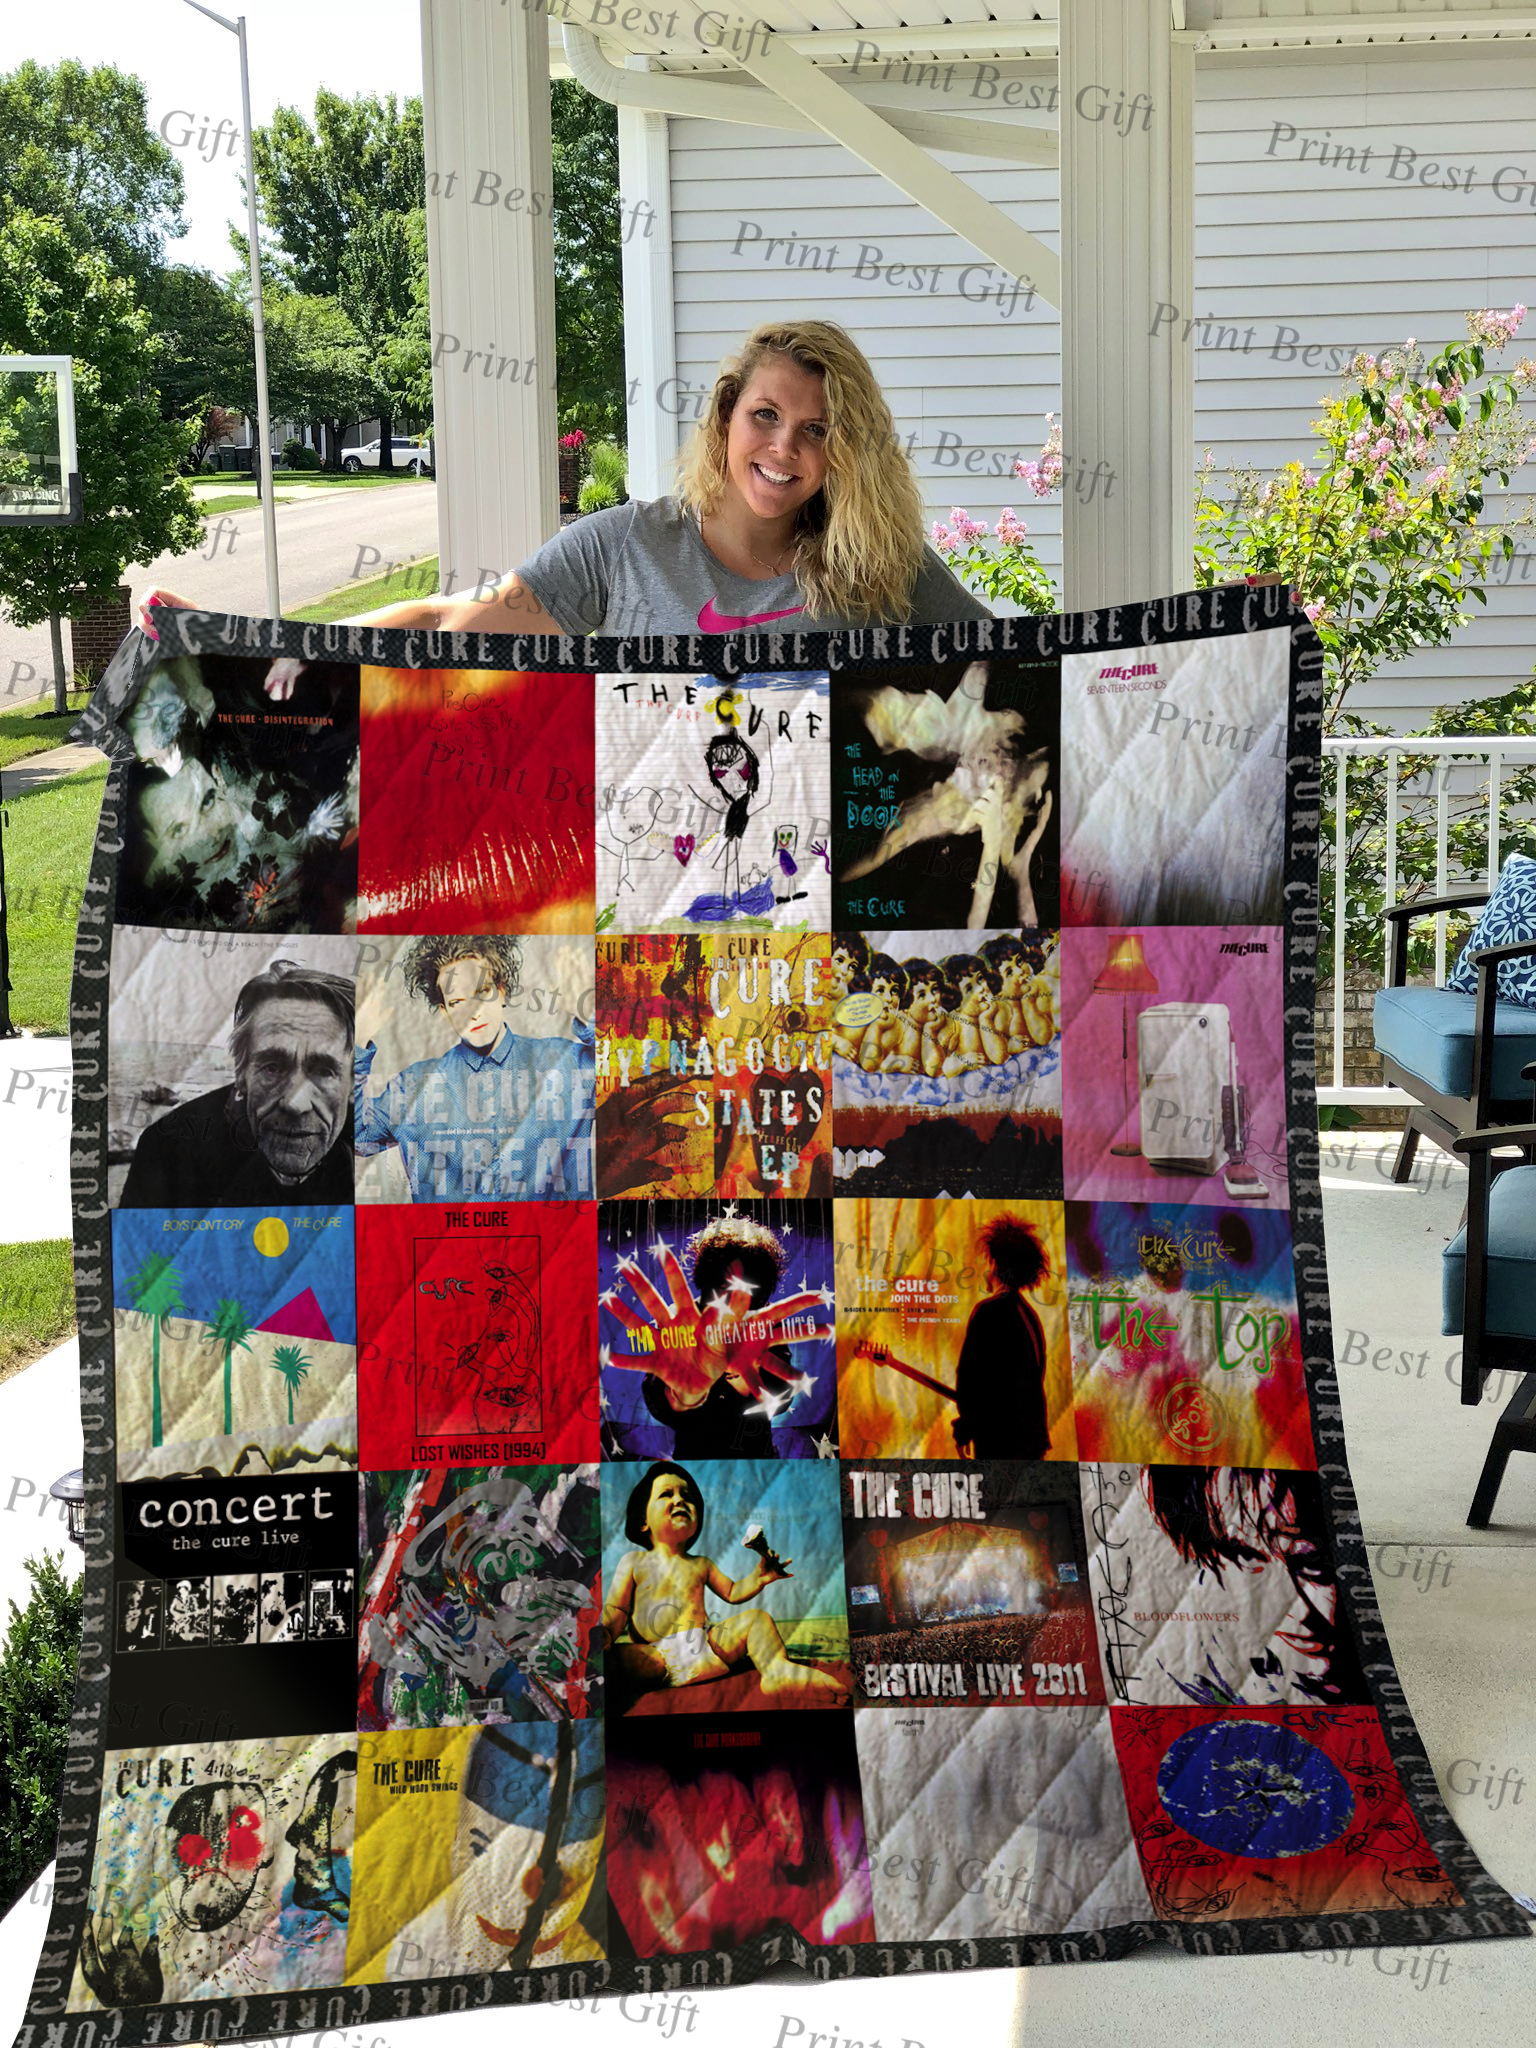 The Cure Albums Cover Poster Quilt Blanket | BlanketsHub